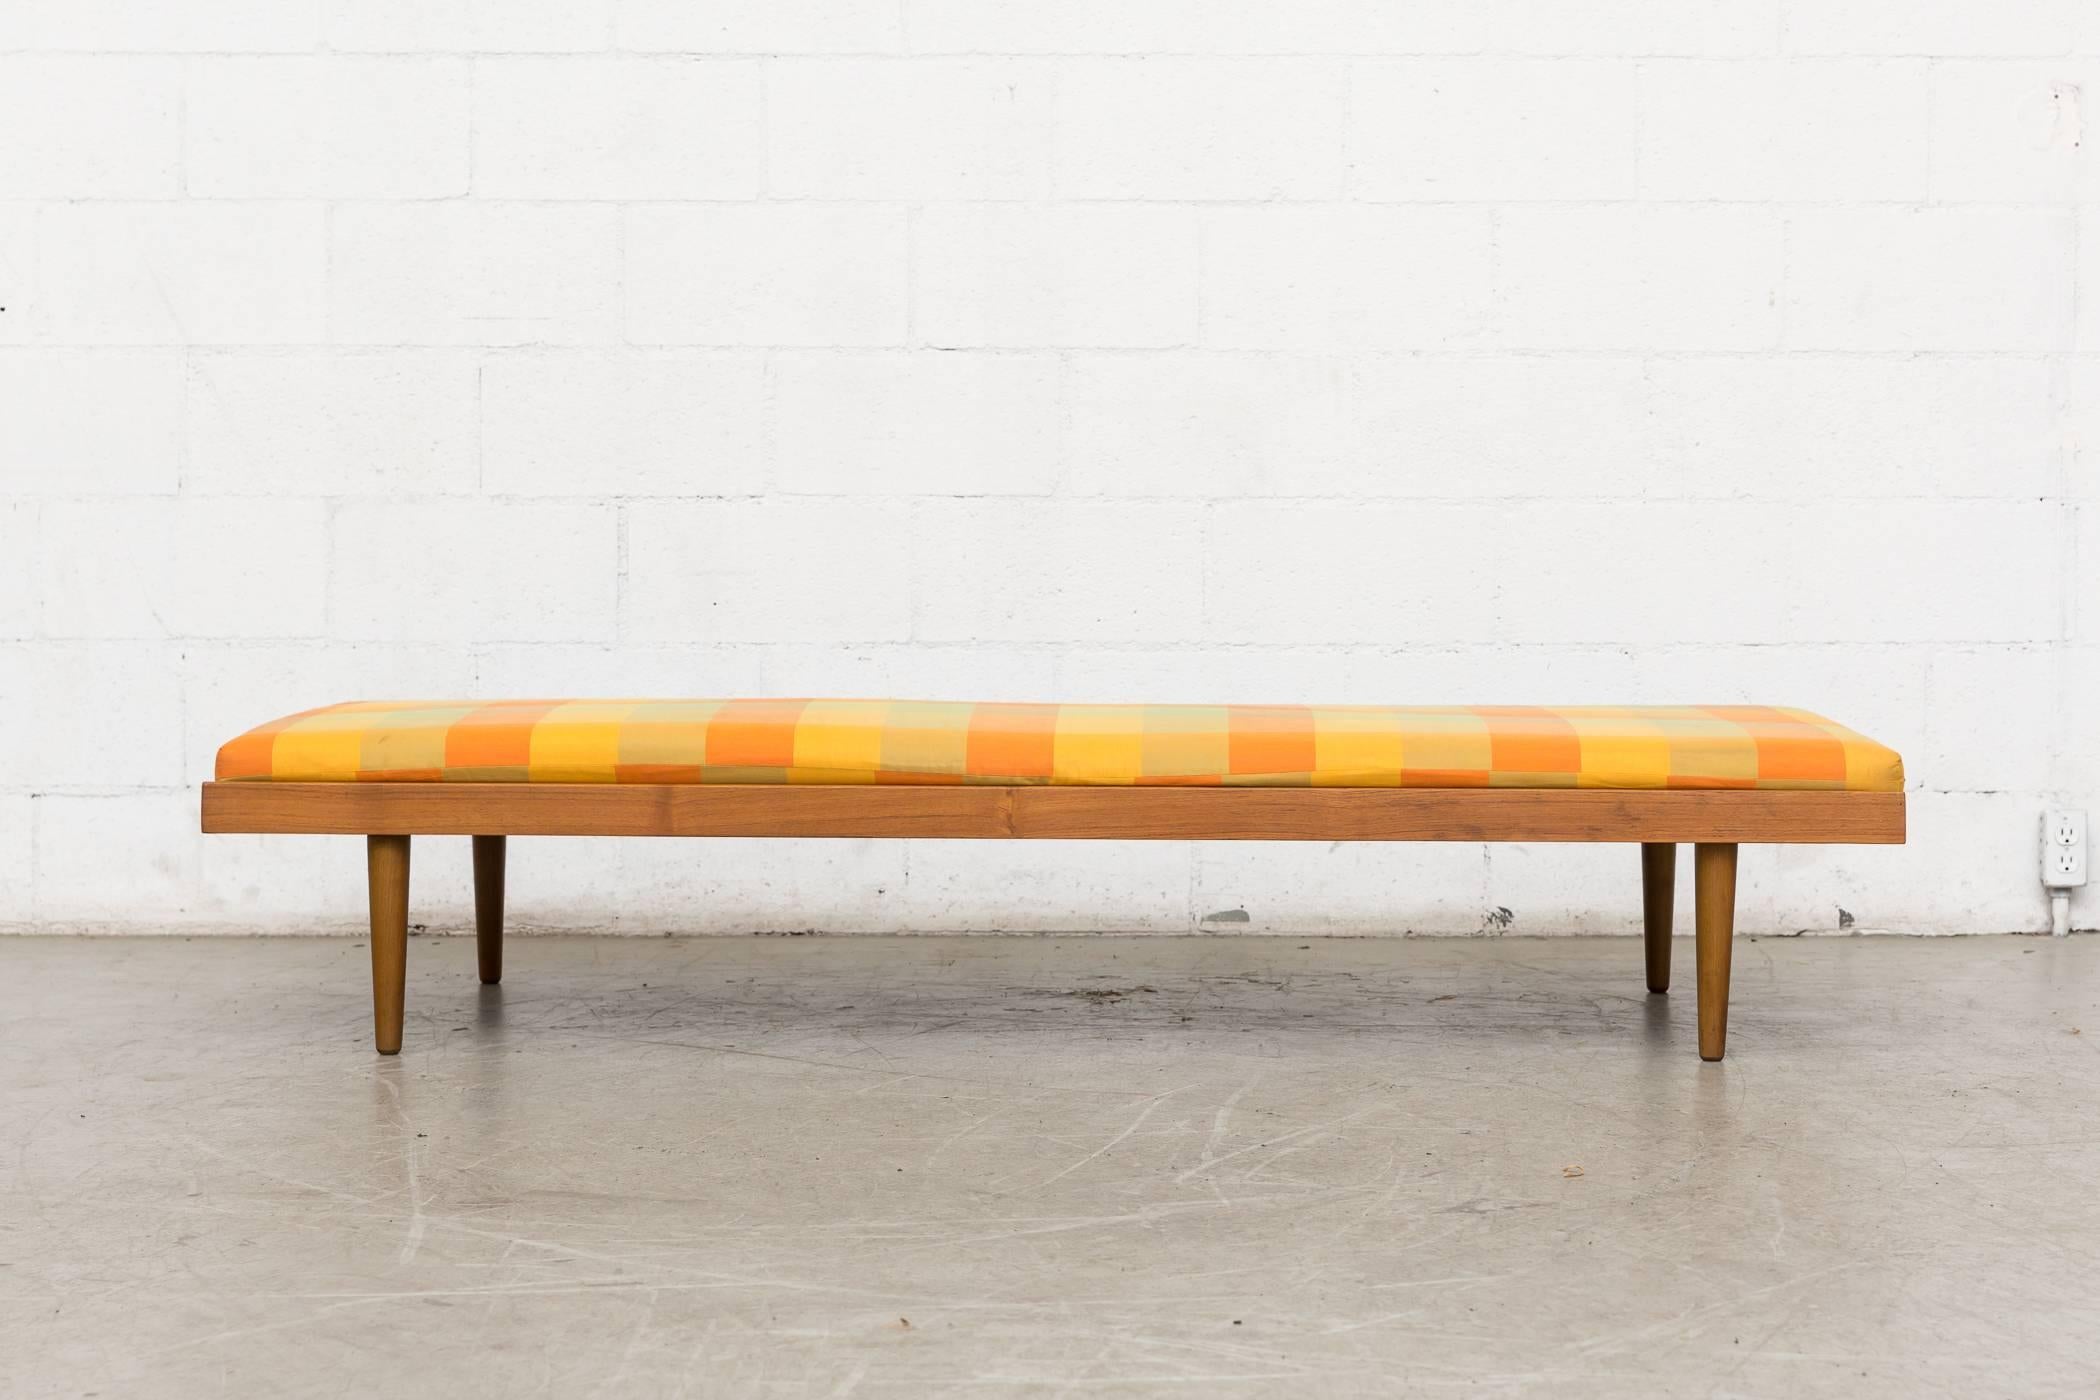 Handsome mid-century Danish teak daybed frame with original vintage yellow/orange/green plaid upholstery. Tapered legs. Lightly refinished. Good original condition.